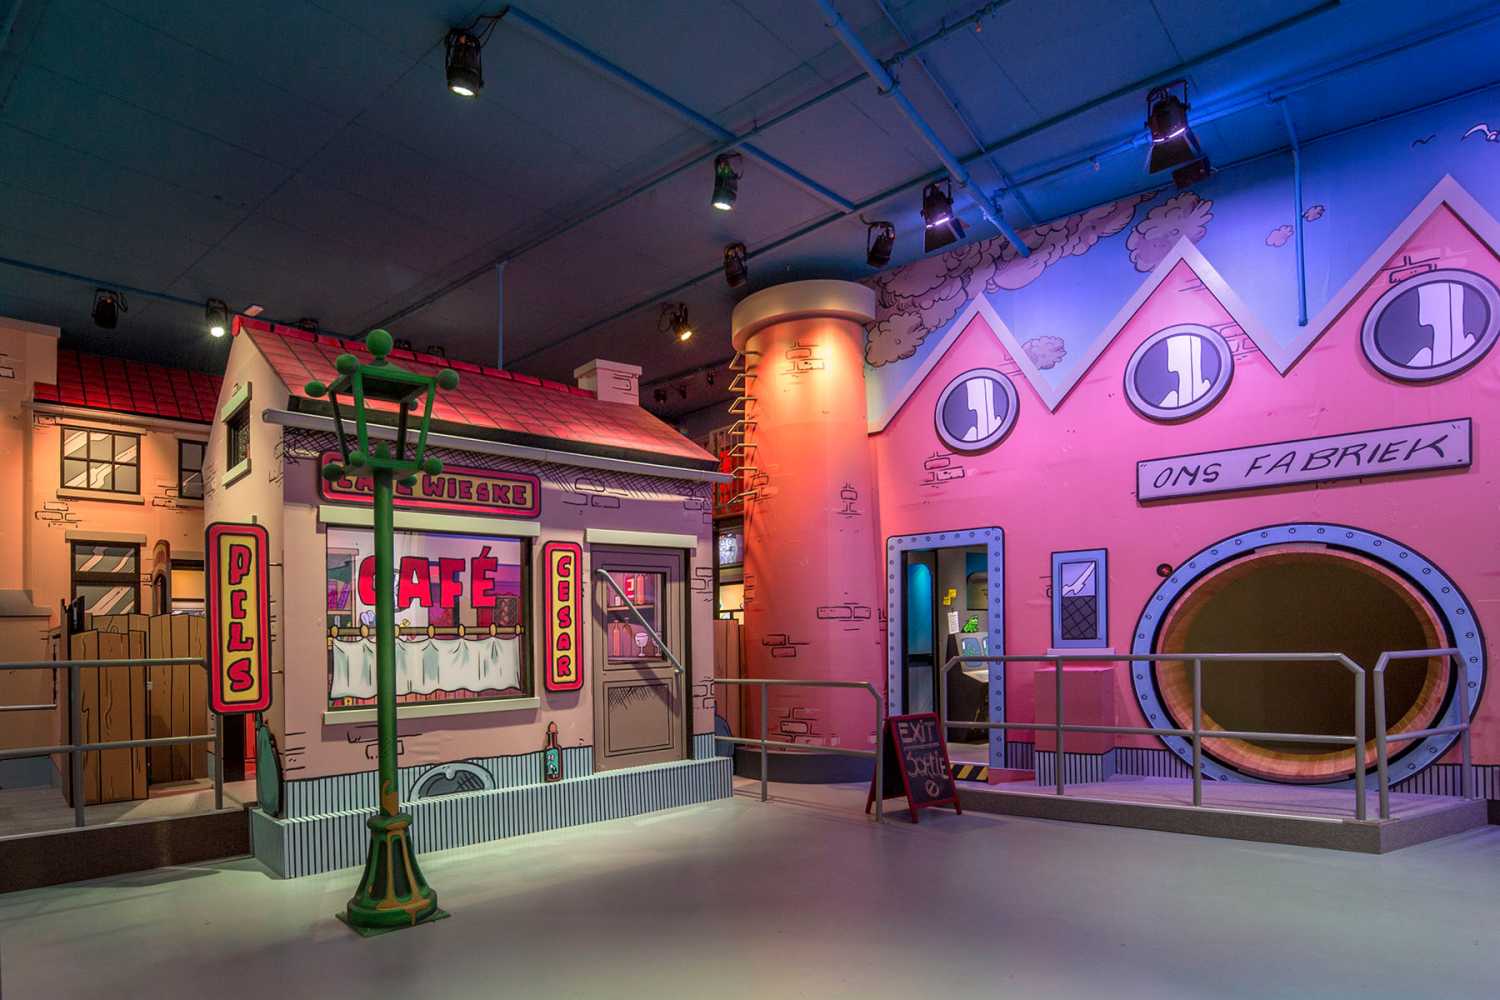 Comics Station Antwerp indoor theme park is a colourful celebration of creativity